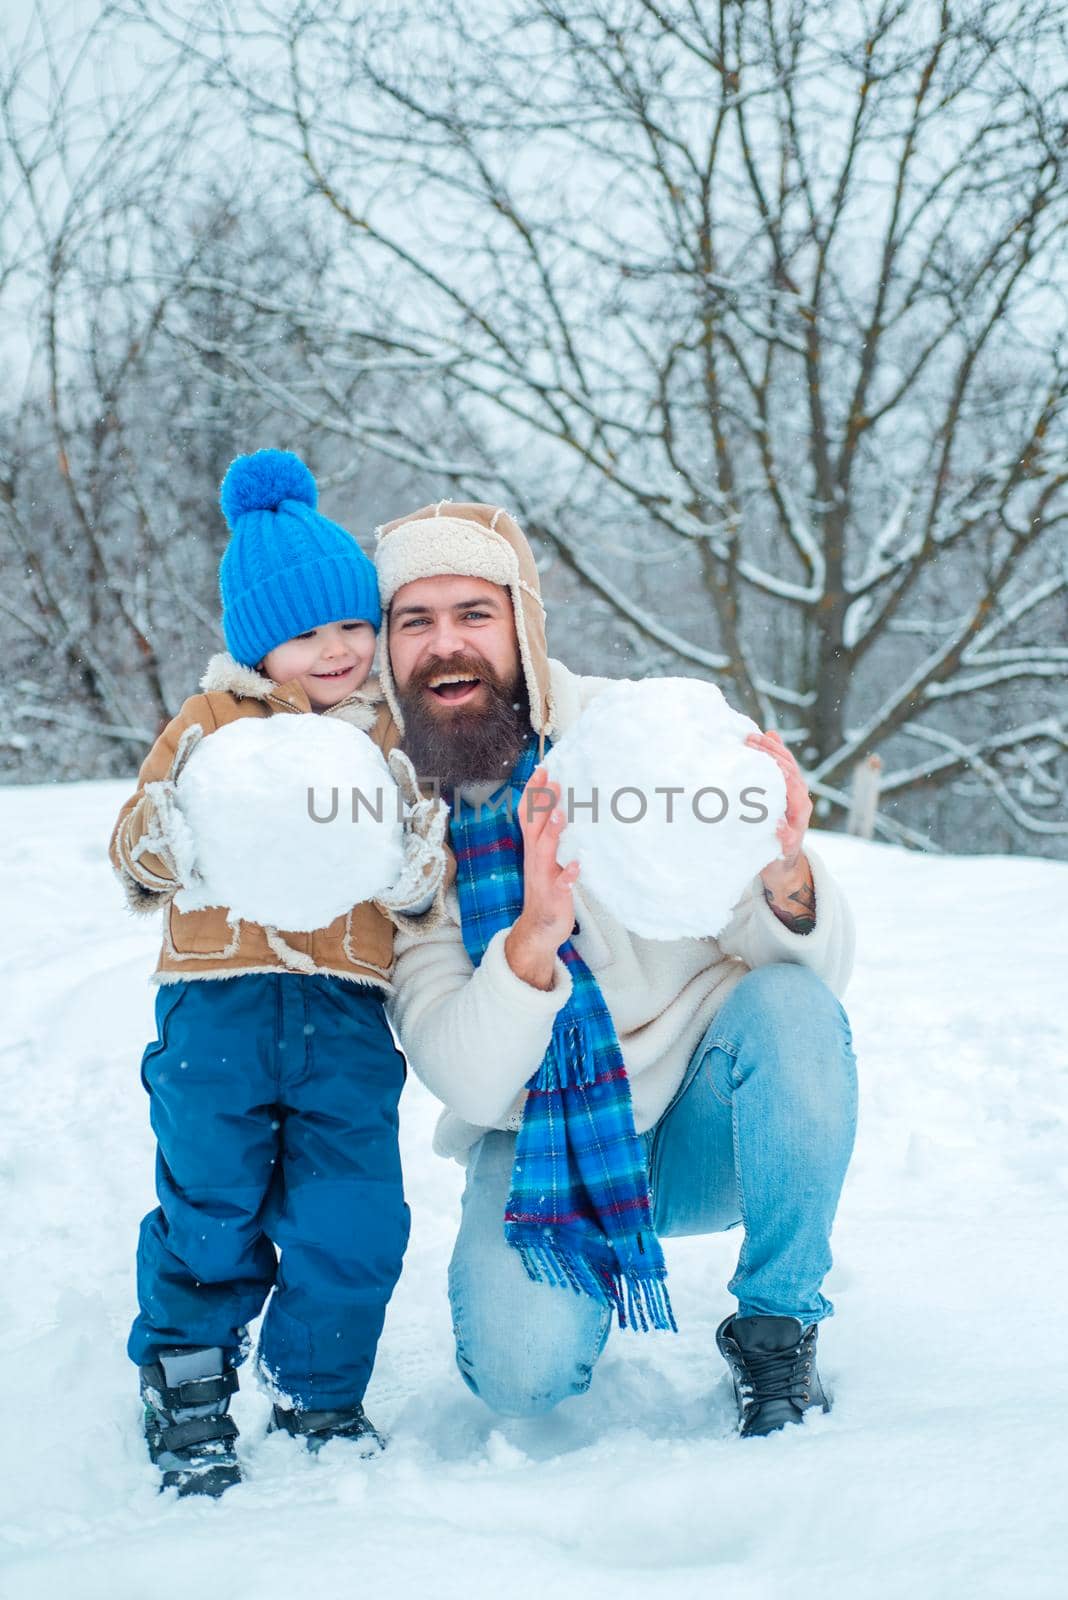 Best winter game for happy family. Happy father and son making snowman in the snow. Handmade funny snow man. Happy family plaing with a snowman on a snowy winter walk